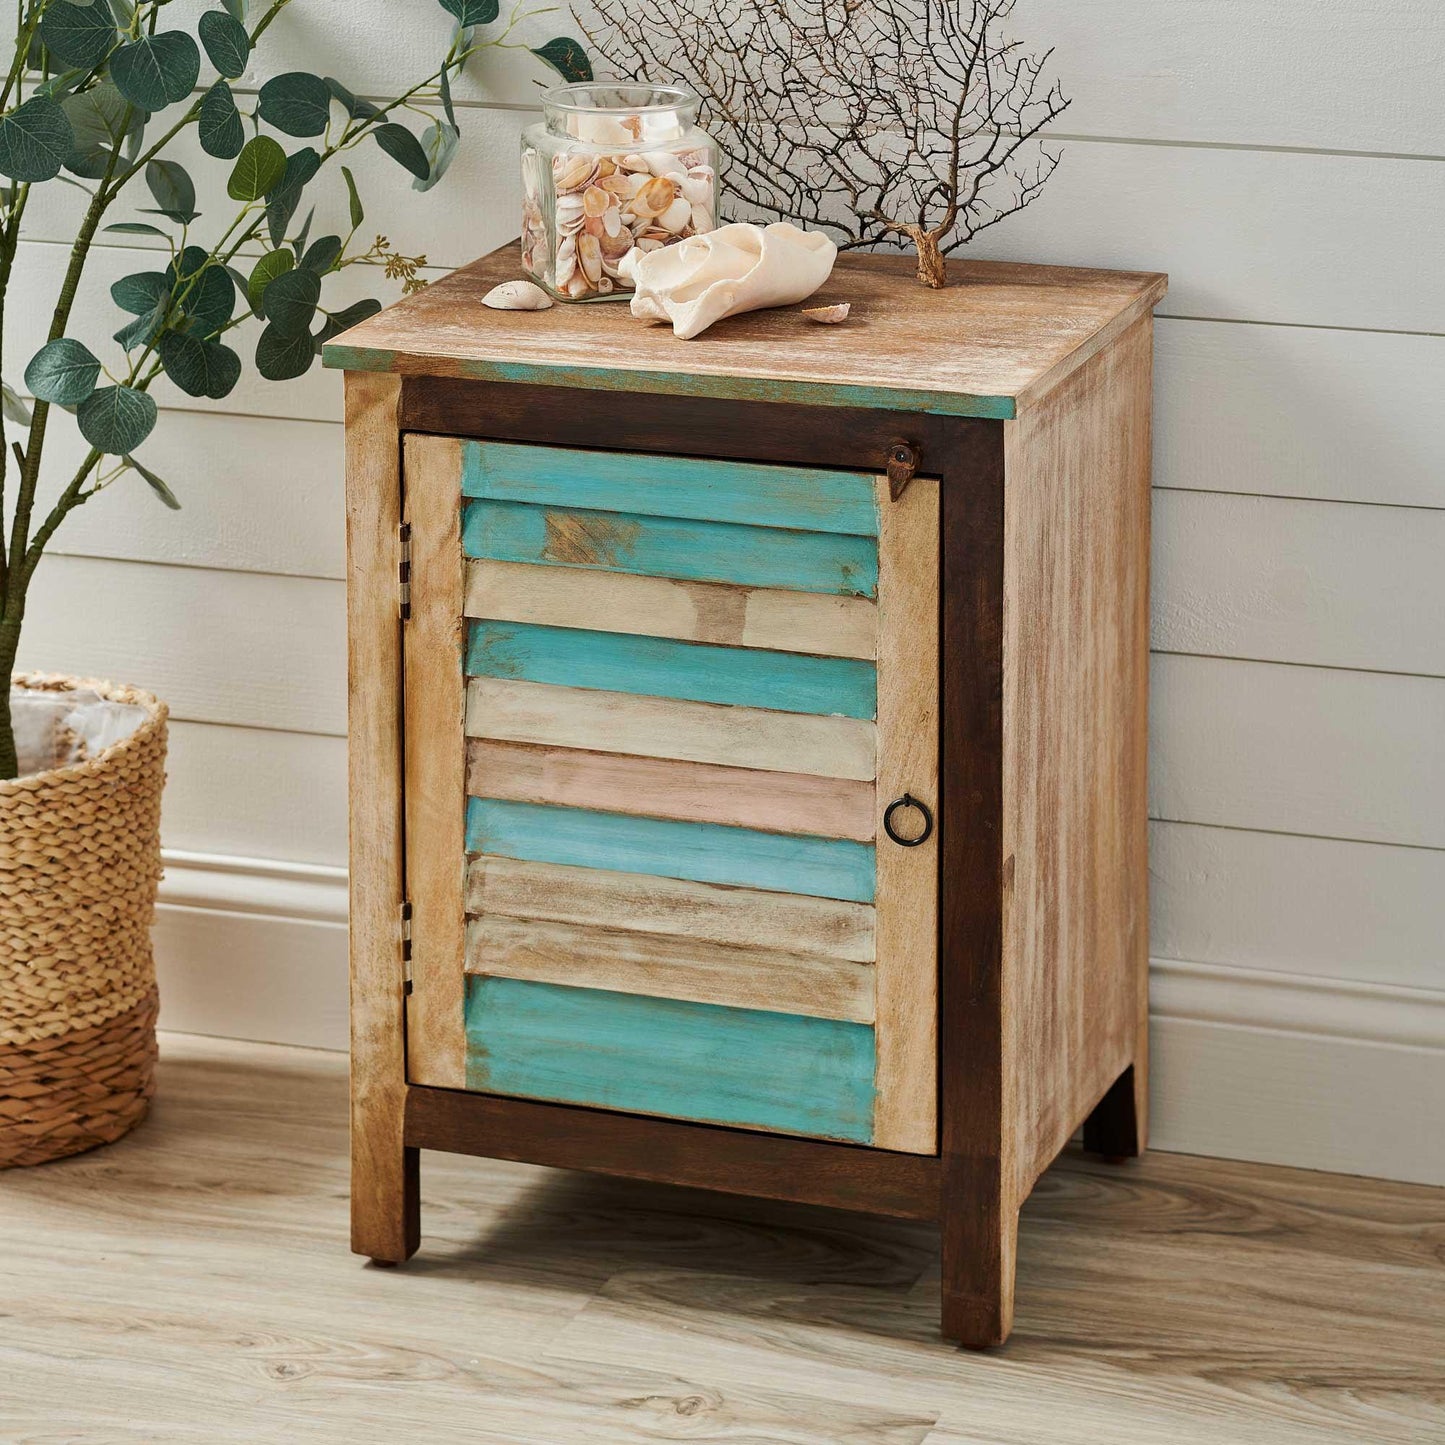 Shabby Chic Shutter Side Table - Wild Wings